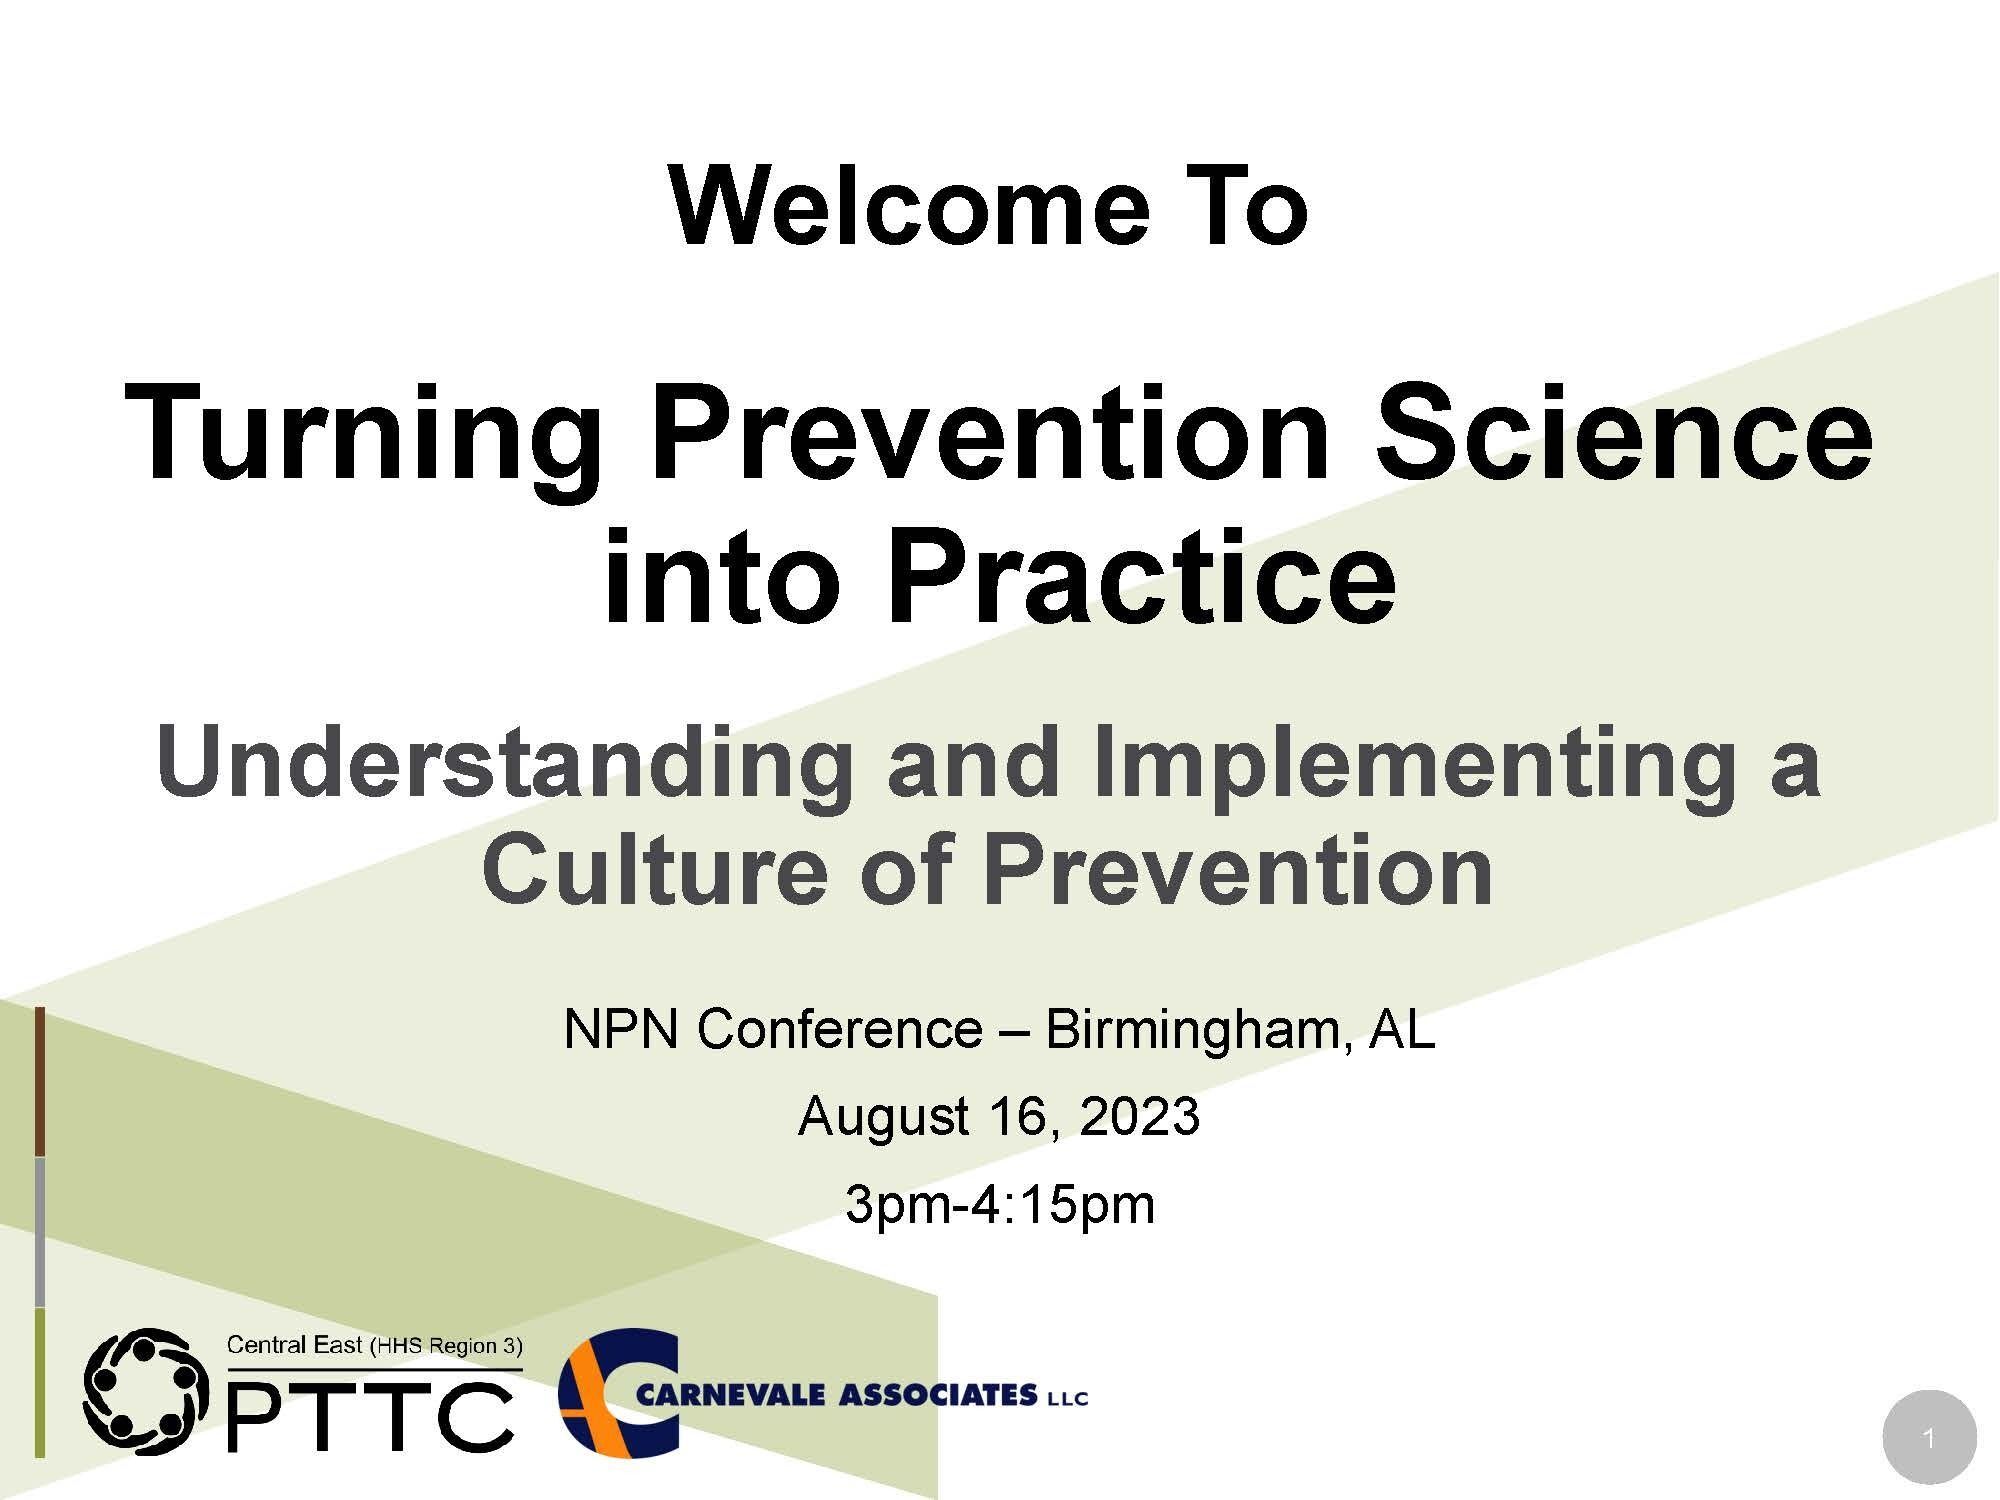 Turning Prevention Science into Practice: Understanding and Implementing a Culture of Prevention